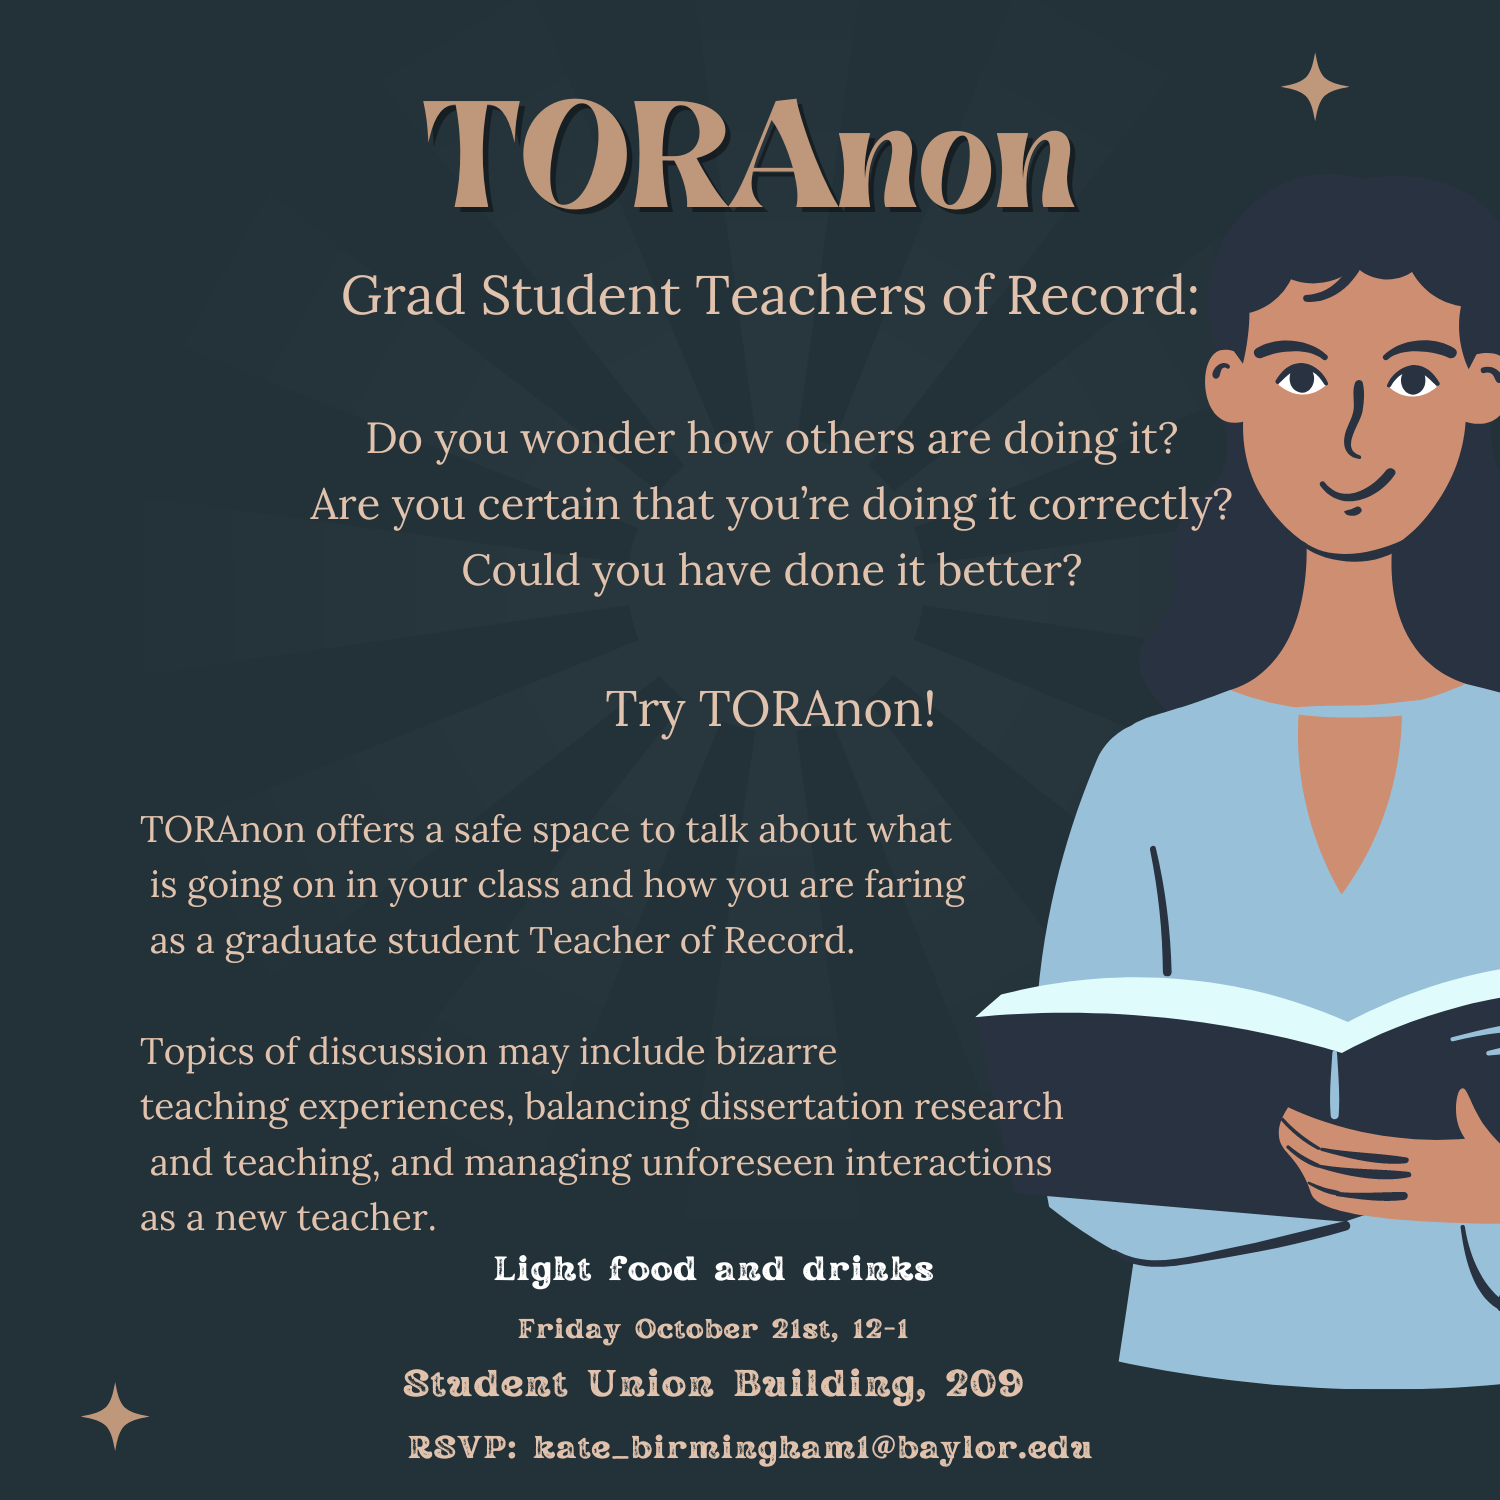 TORAnon. Grad Student Teacher of Record: do you wonder how others are doing it? Are you certain that you’re doing it correctly? Could you have done it better? Try TORAnon! TORAnon offers a safe s[ace to talk about what is going on in your class and how you are faring as a graduate student Teacher of Record. Topics of discussion many include bizarre teaching experiences, balancing dissertation research and teaching, and managing unforeseen interactions as a new teacher. Light food and drinks. Friday October 21st, 12 – 1 pm. Student Union Building, 209. RSVP: kate_birmingham1@baylor.edu